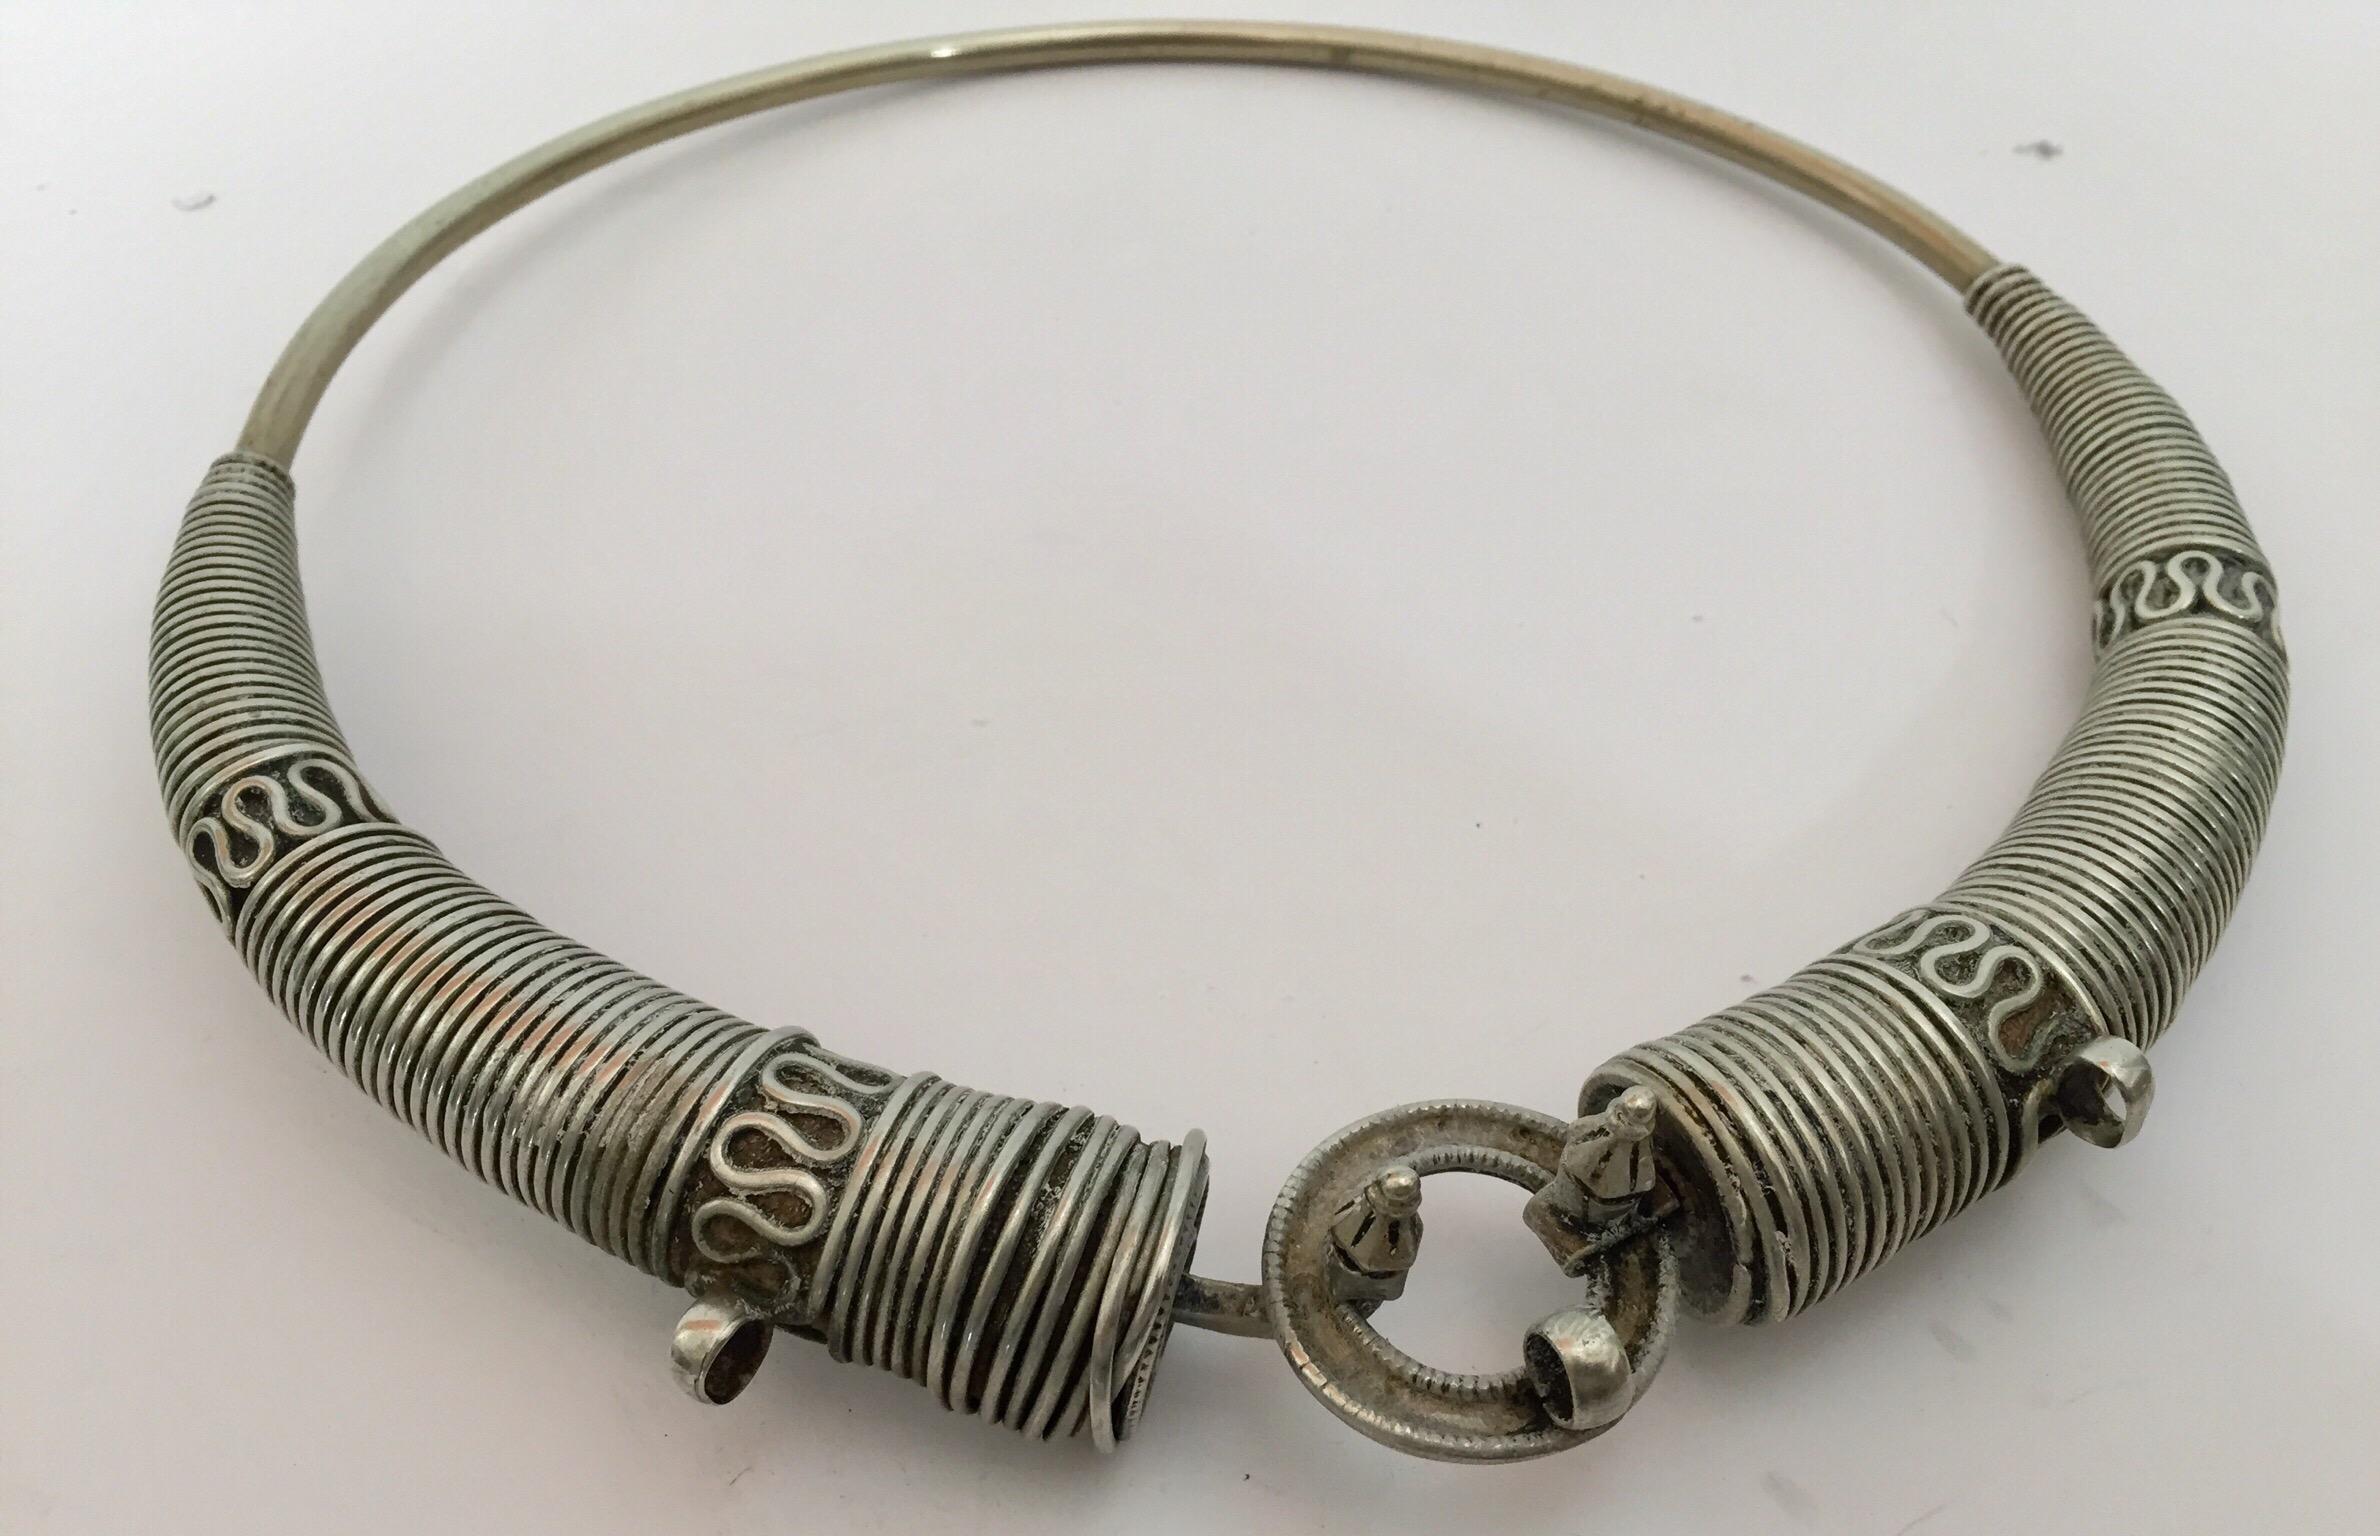 Traditional torque or Hansuli silvered necklace choker from Lambadi or Banjara and Sugali People, Andhra Pradesh, India.t India, circa 1950.
Fabulous vintage heavy spiral silvered plated choker necklace in wonderful vintage condition.
Silver, but